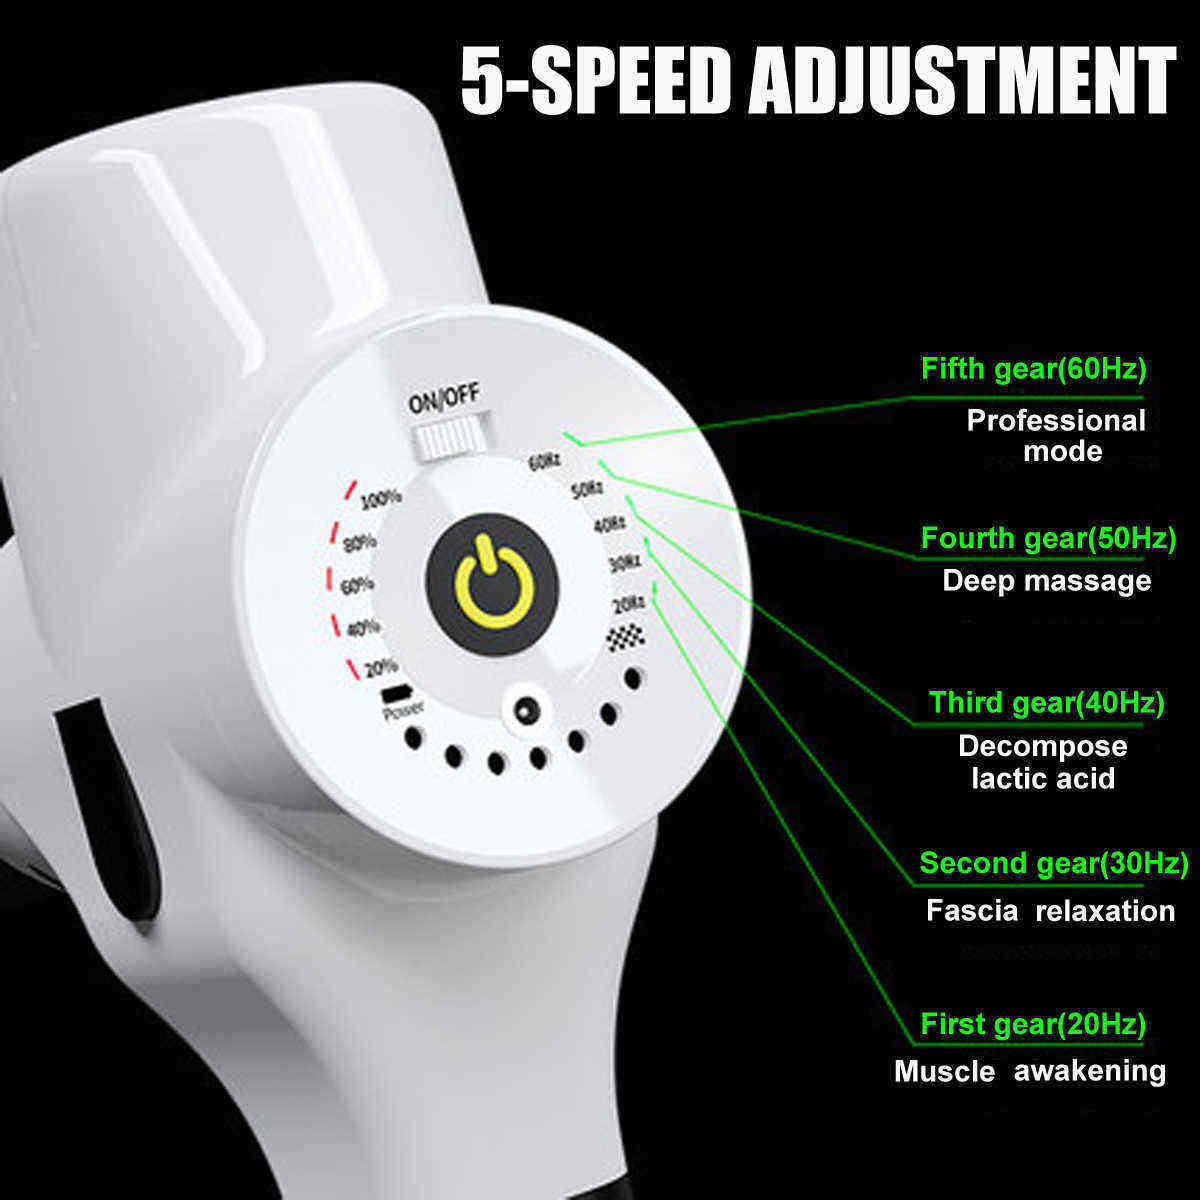 100-240V-Electric-Percussive-Massager-Rechargeable-Hand-Held-Vibration-Therapy-Device-with-6-Heads-1535822